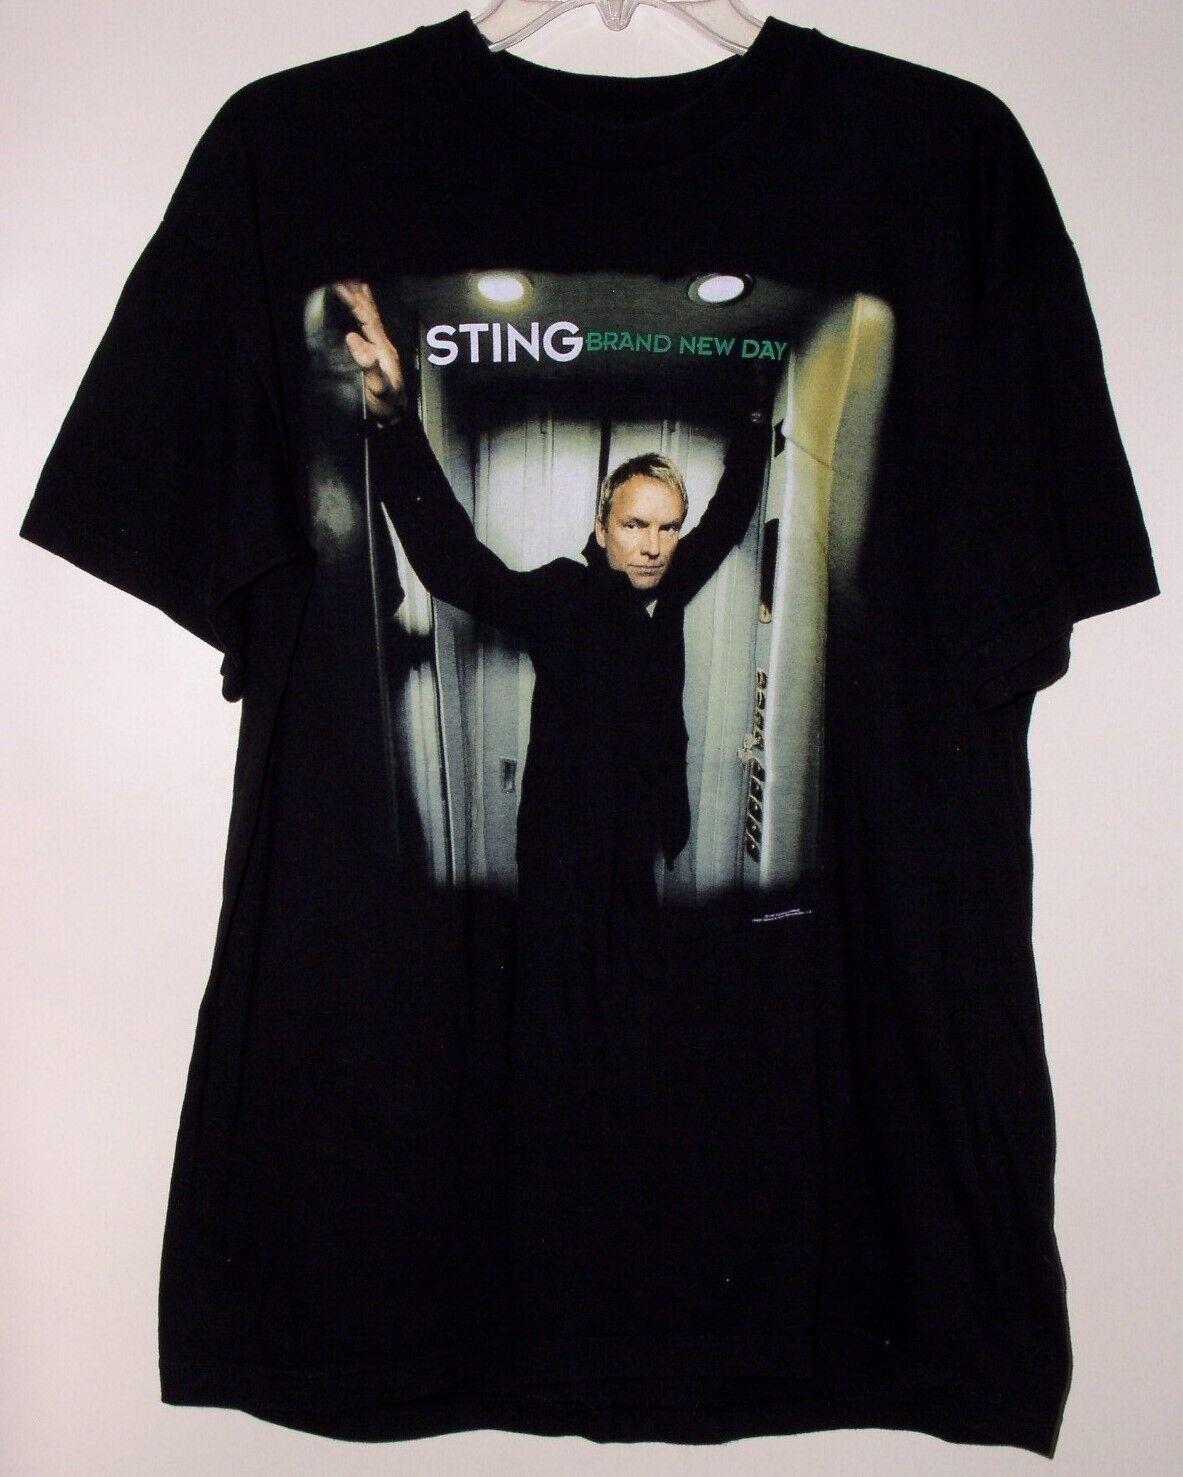 Primary image for Sting Concert Tour T Shirt Vintage 2000 Brand New Day Size Large